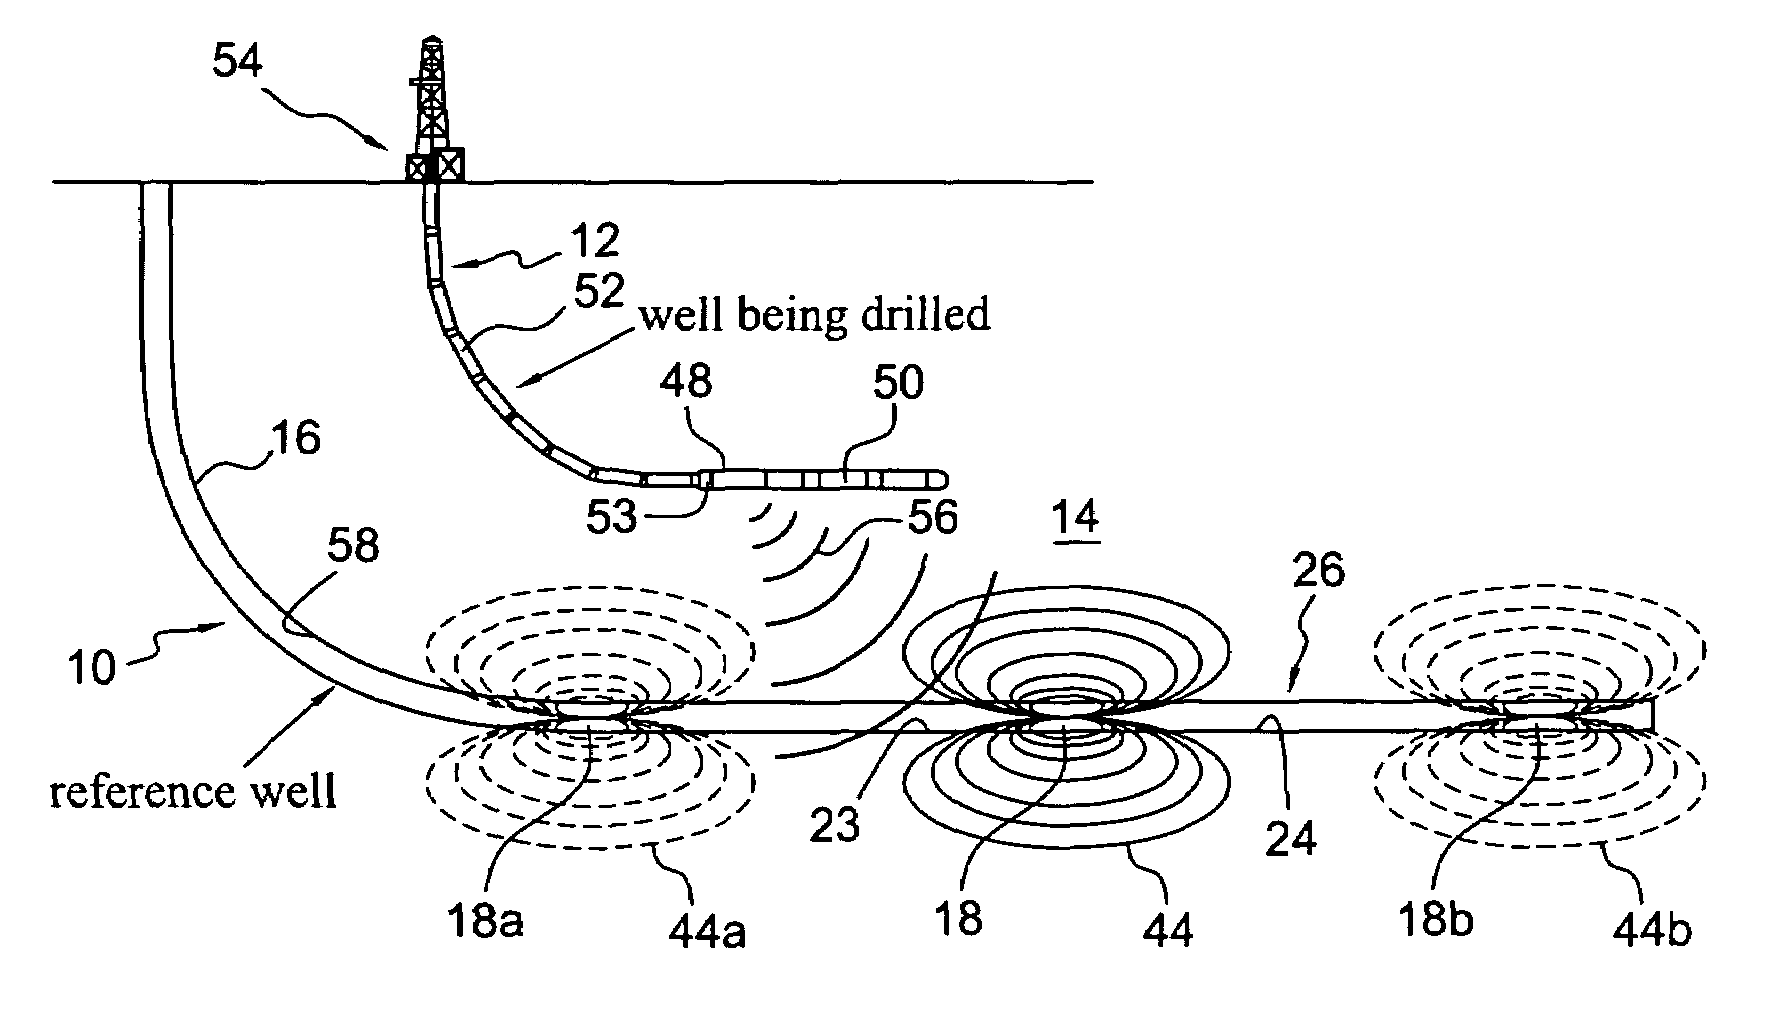 Electromagnetically determining the relative location of a drill bit using a solenoid source installed on a steel casing